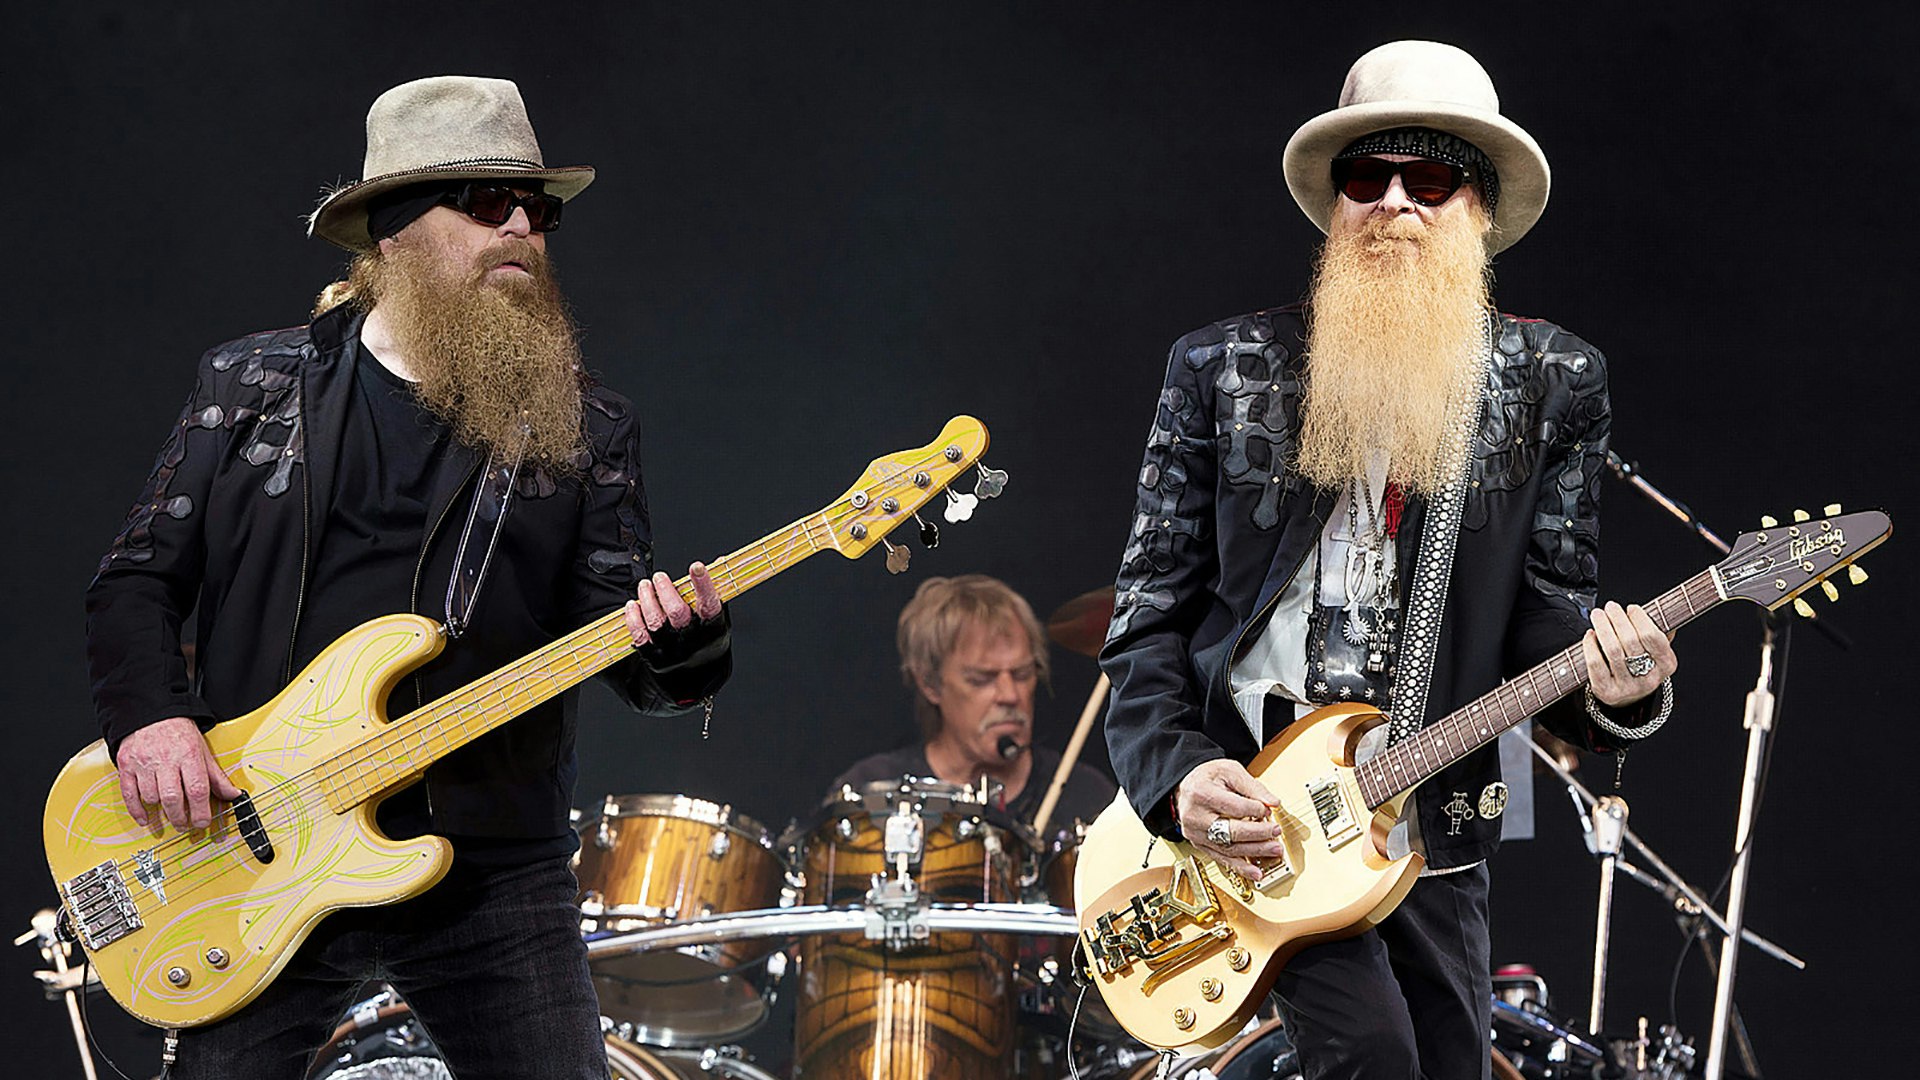 ZZ Top: That Little Ol' Band from Texas | Alamo Drafthouse Cinema